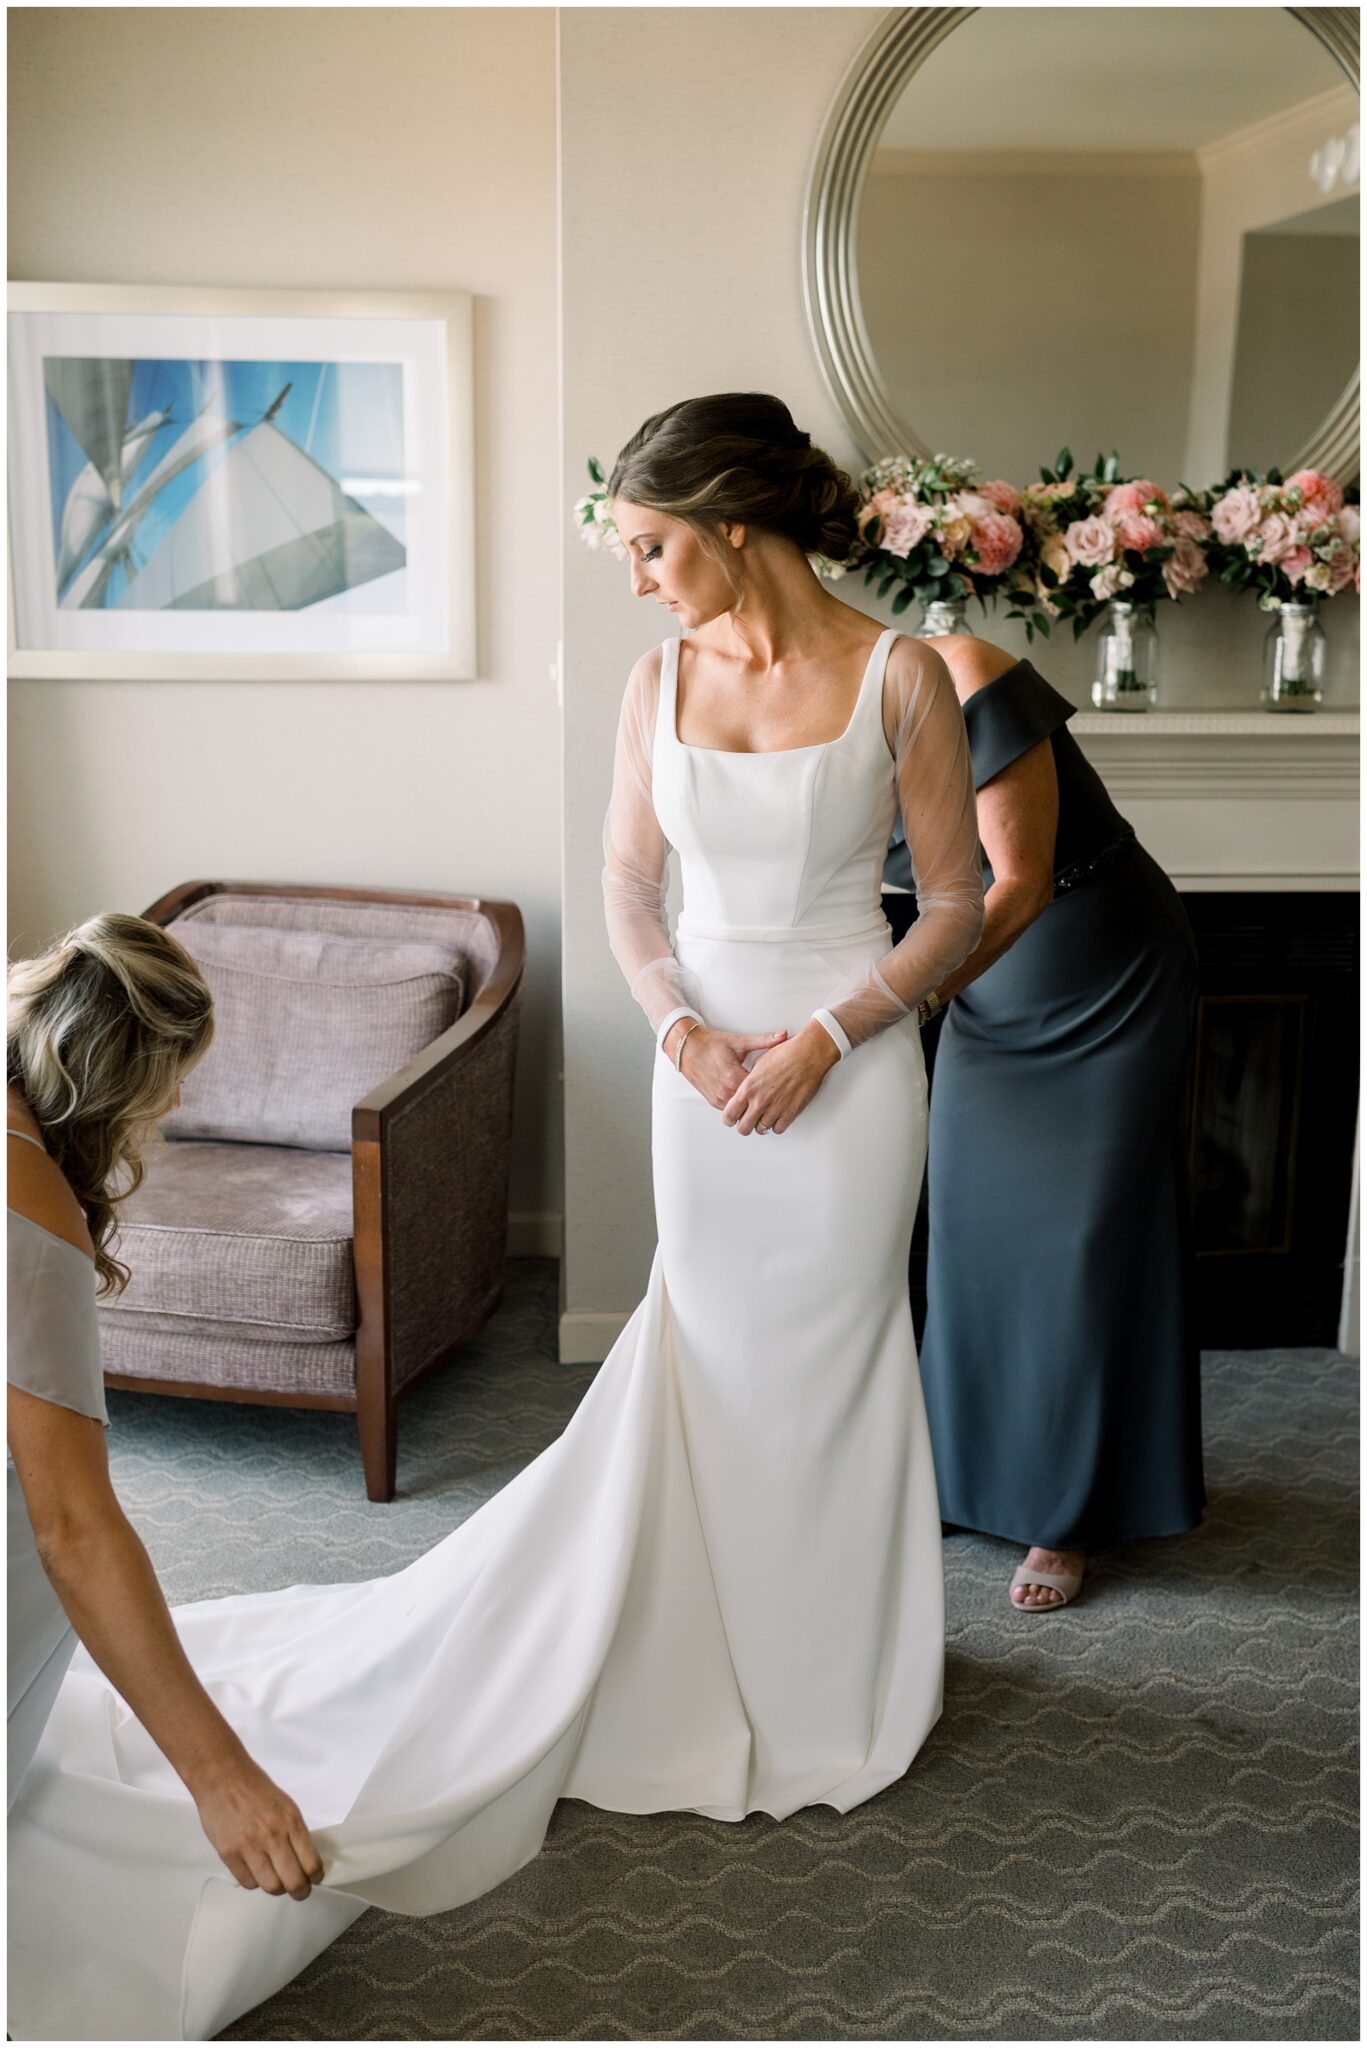 Seacoast NH Wedding Photographer Casey Durgin photographs Bride getting into wedding gown.